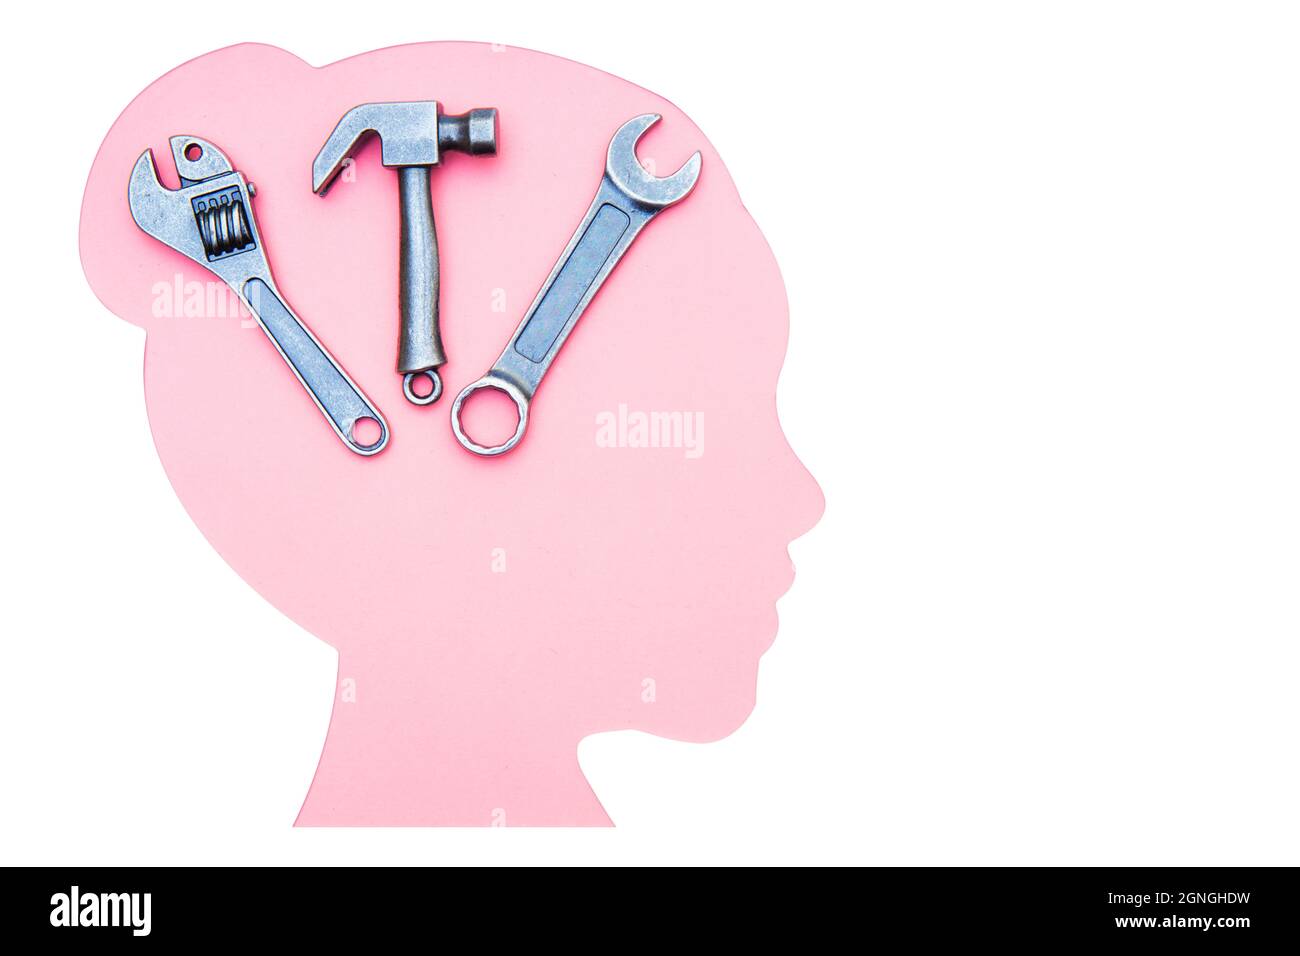 Cut-out woman's head profile silhouette with a kit of small hand tools made of steel isolated on white. Women in engineering and technology. Stock Photo